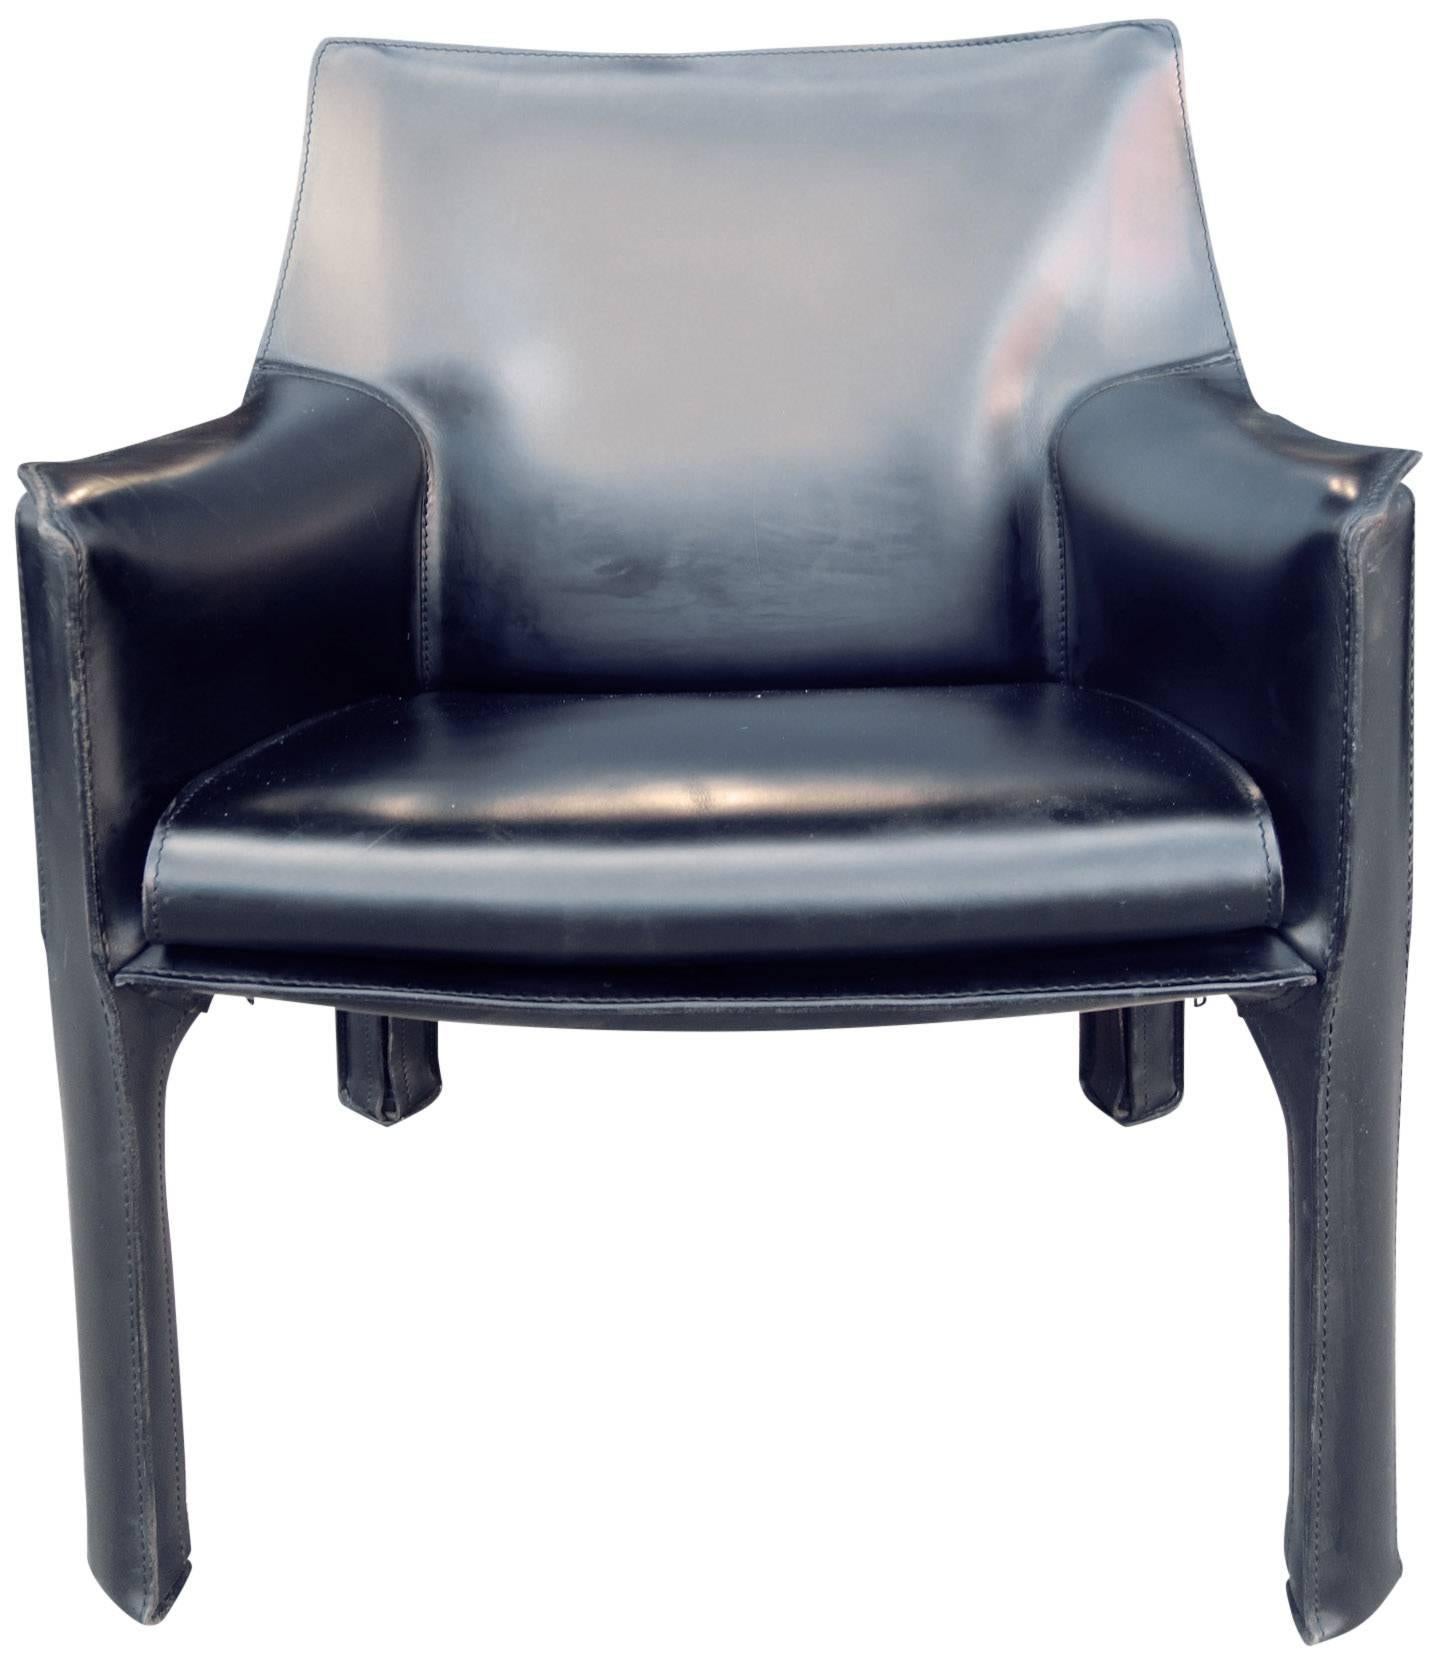 20th Century Cassina Cab Lounge Chair by Mario Bellini